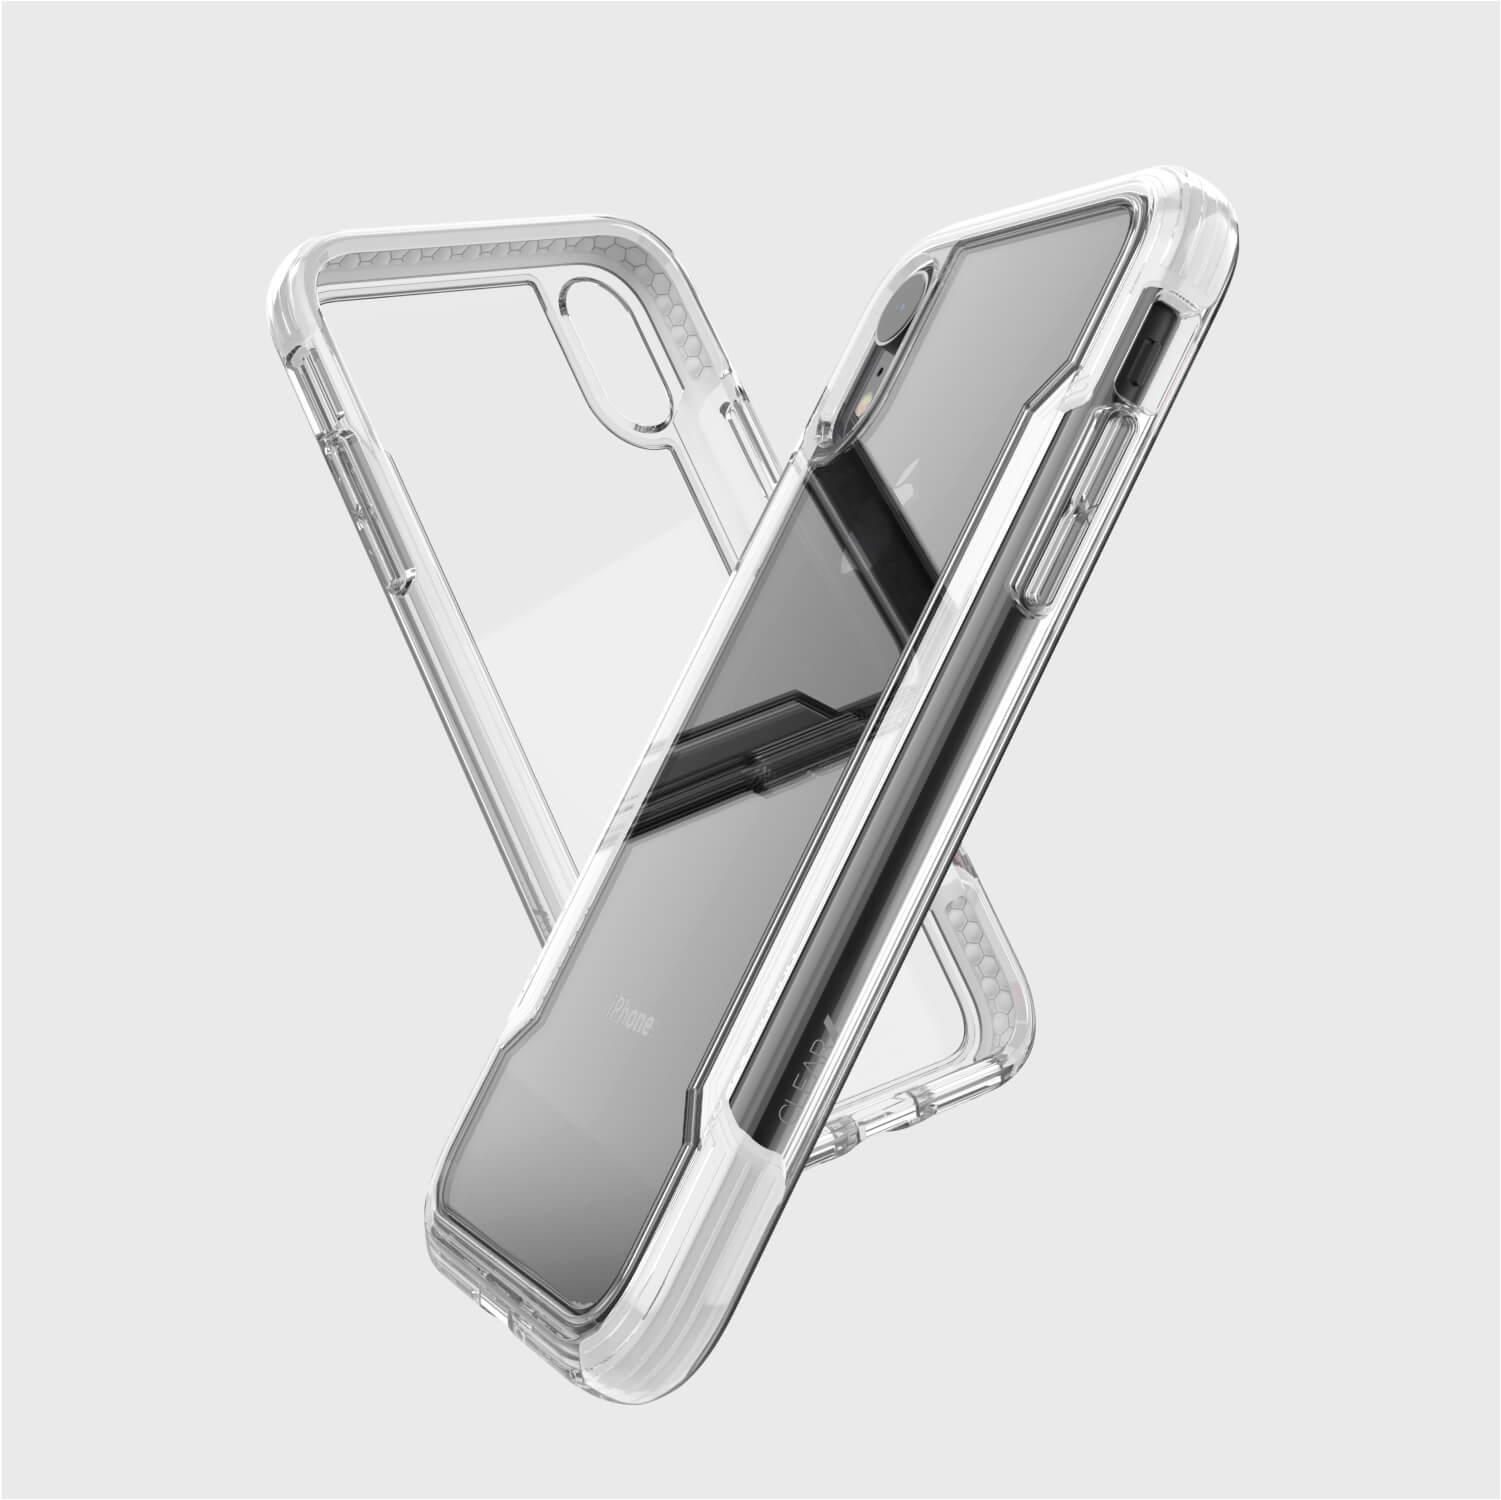 A Raptic iPhone XR Case - CLEAR on a white background.